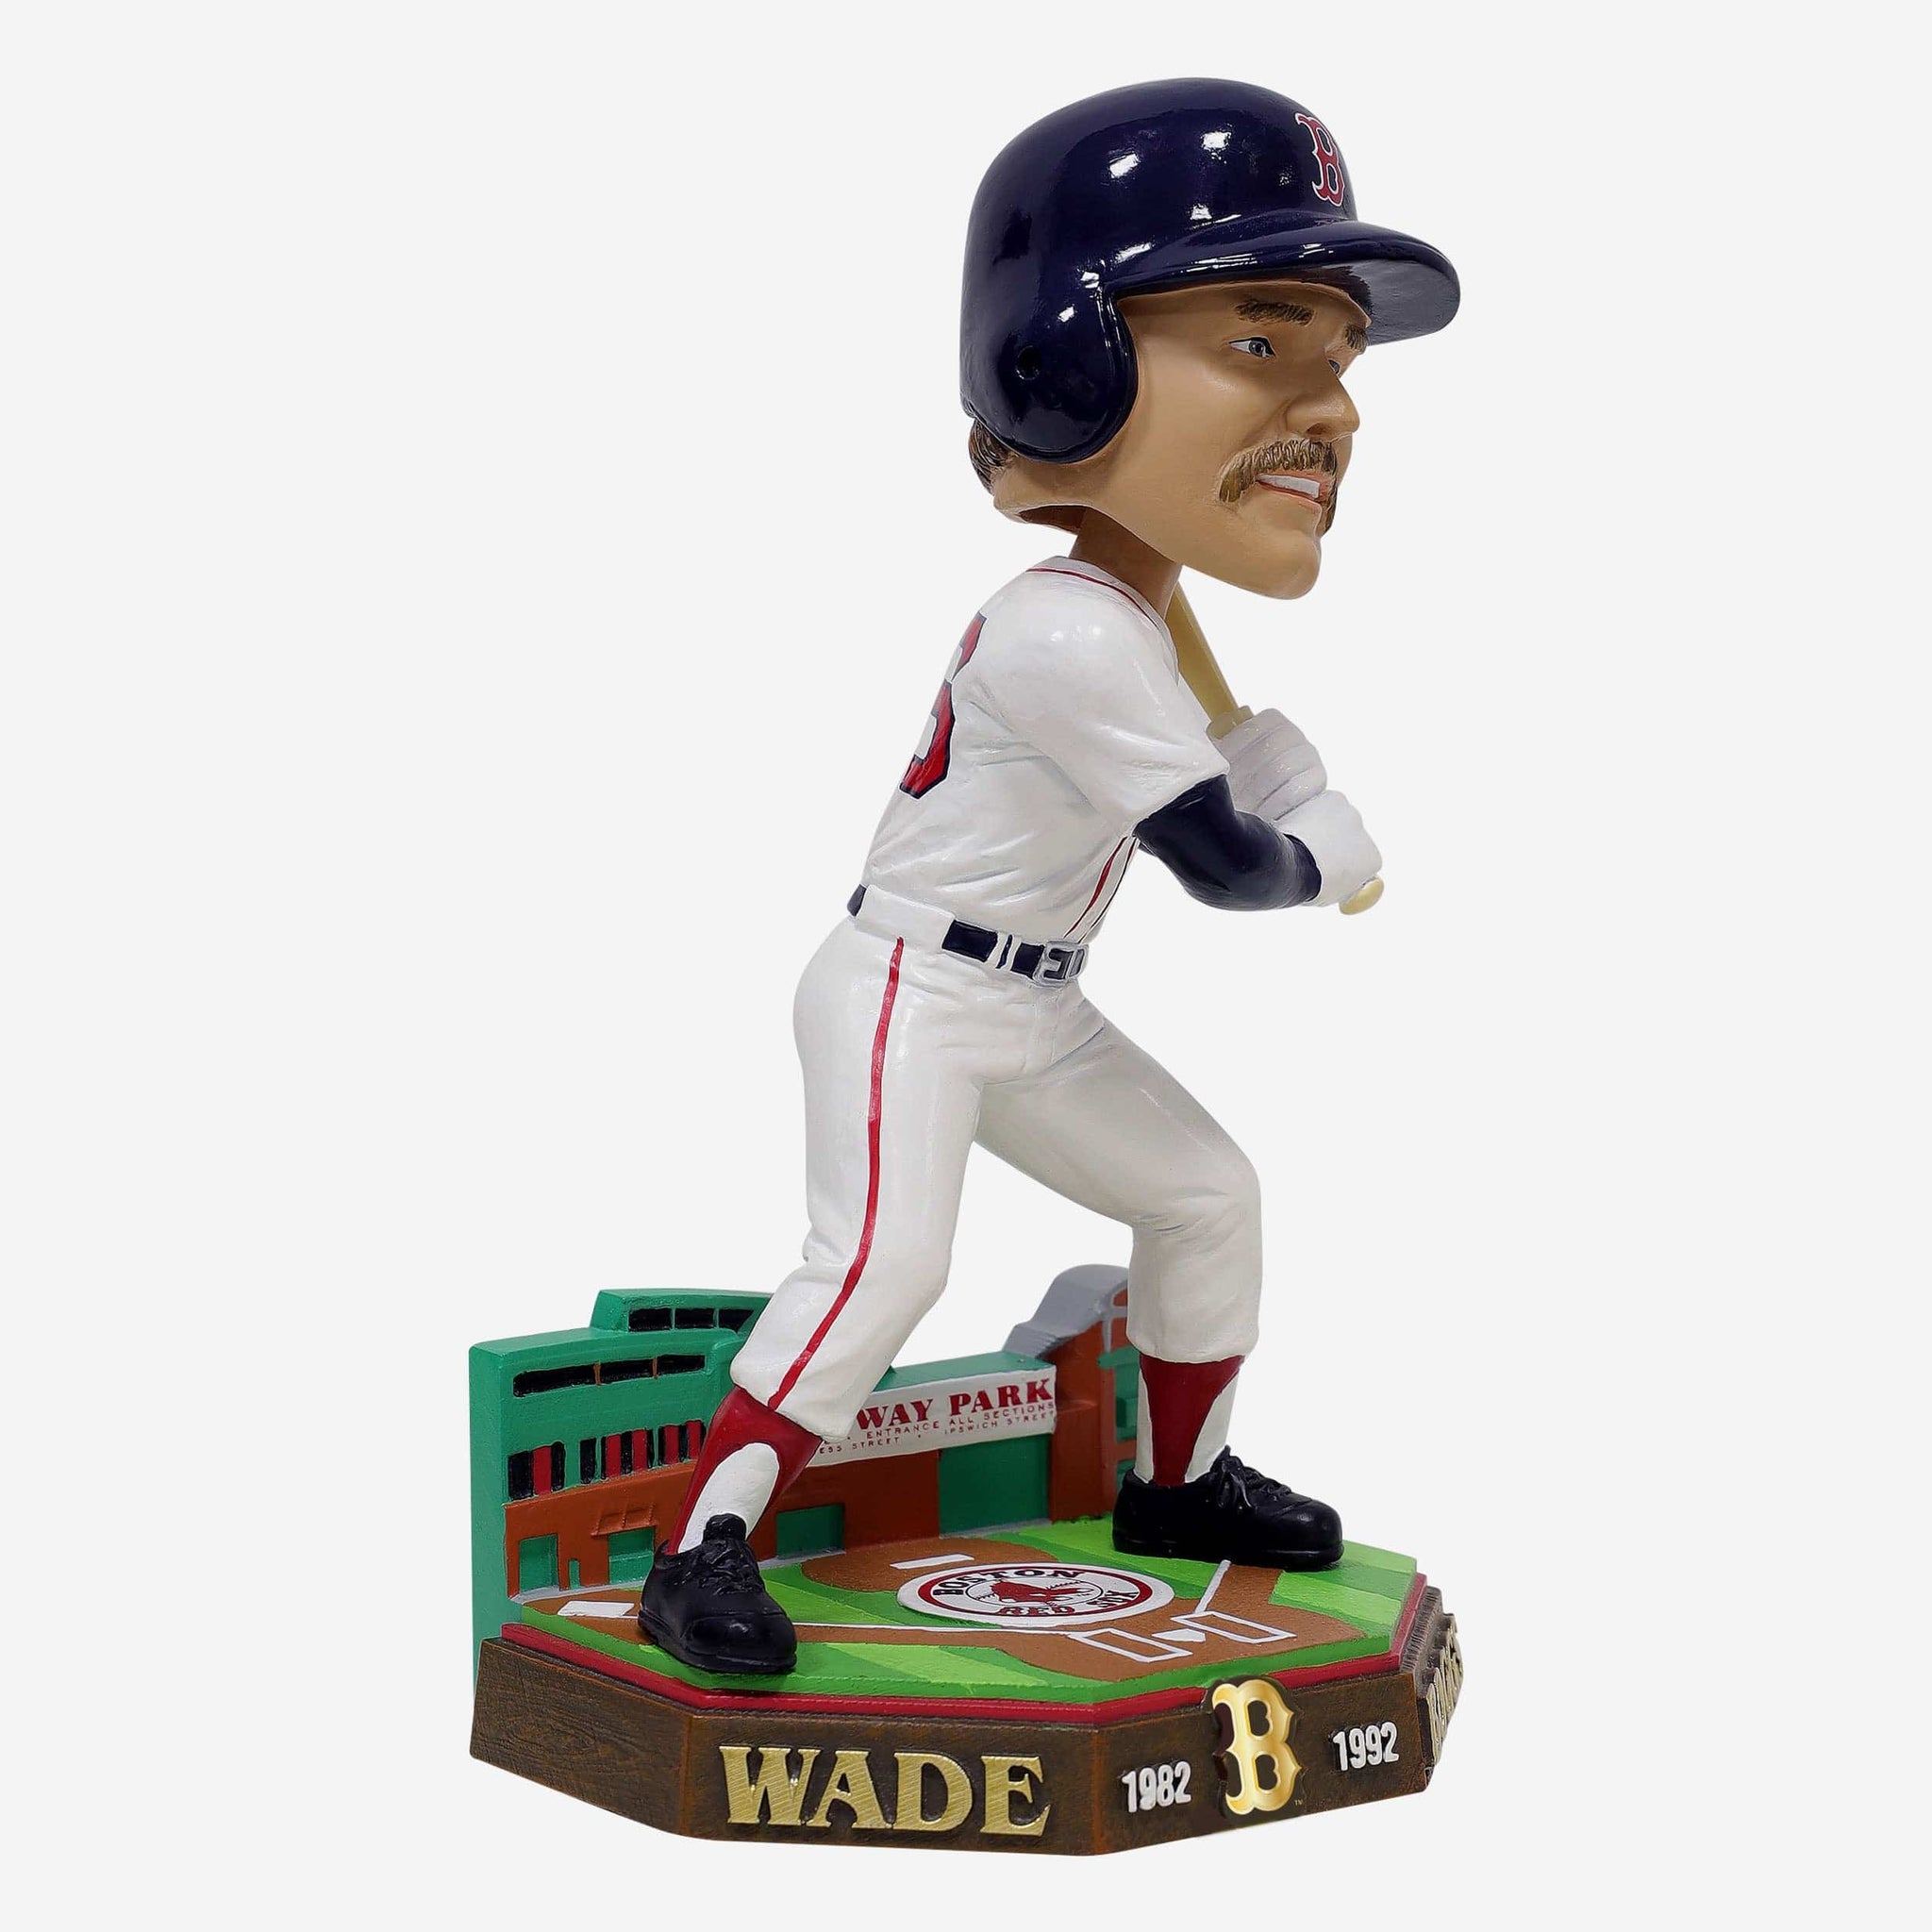 Wade Boggs attends bobblehead night at Trop